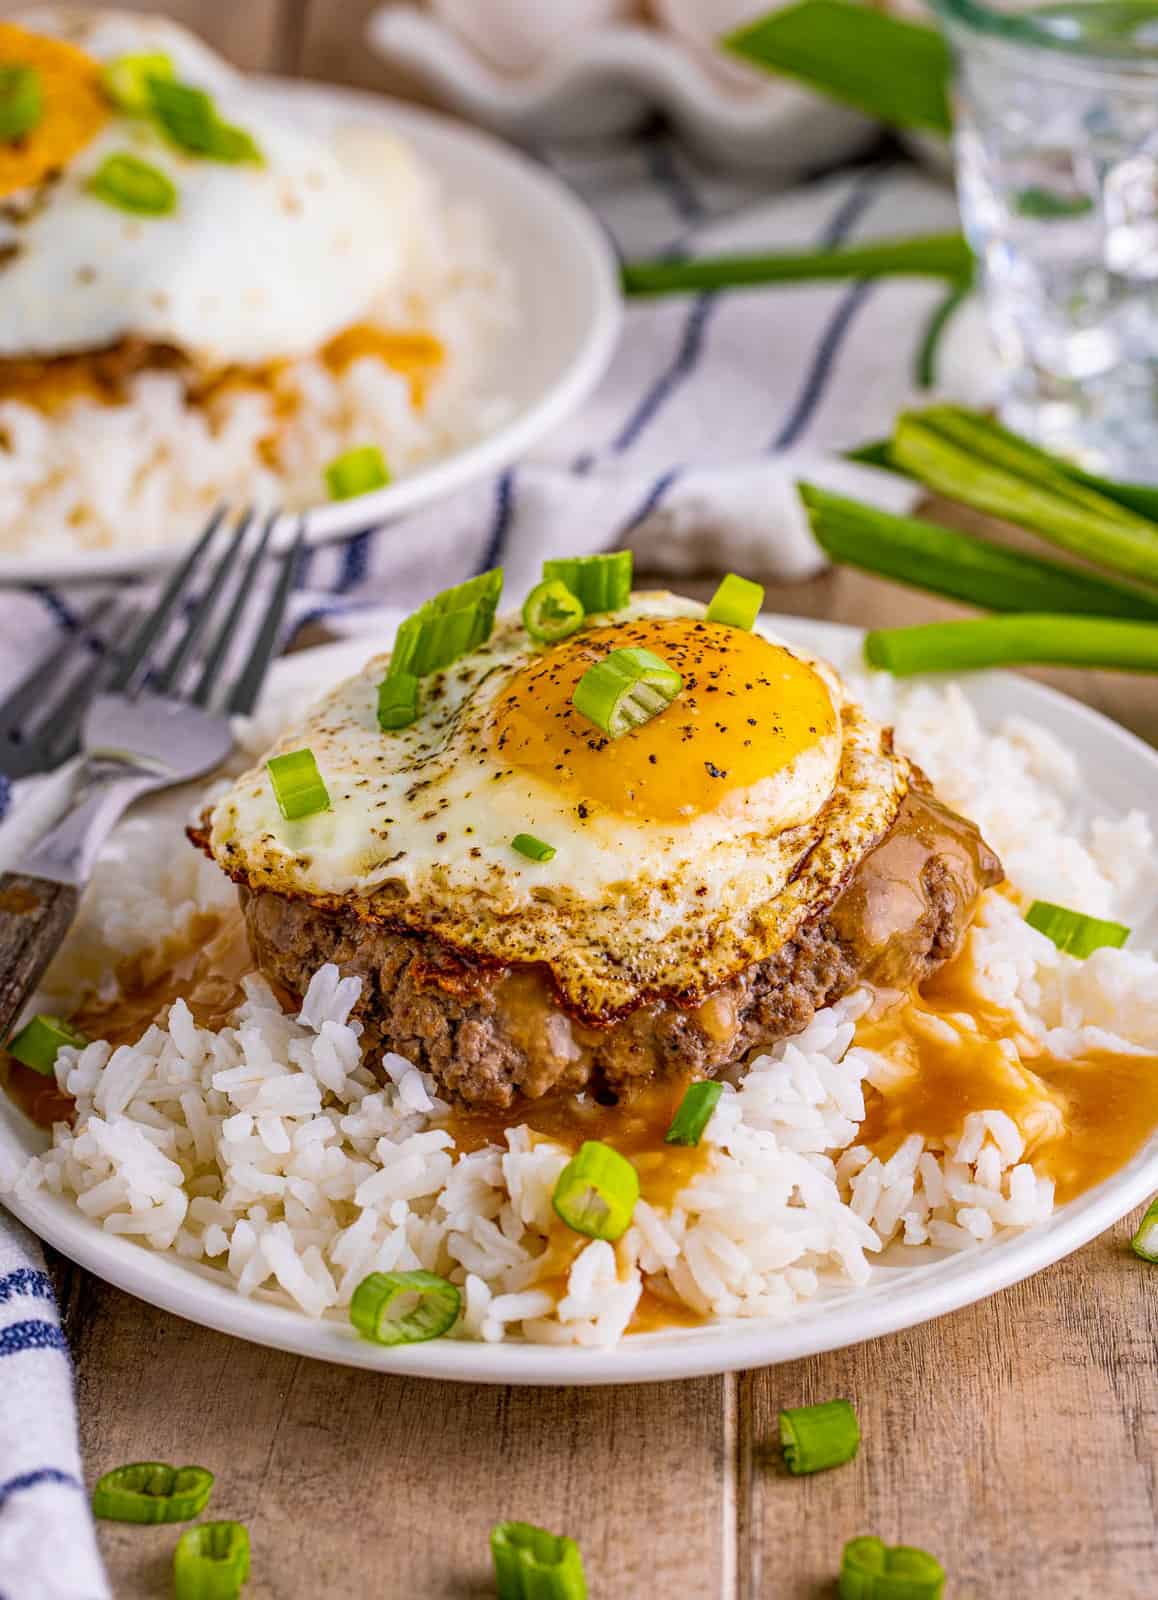 Finished Loco Moco Recipe one plate garnished with green onions.